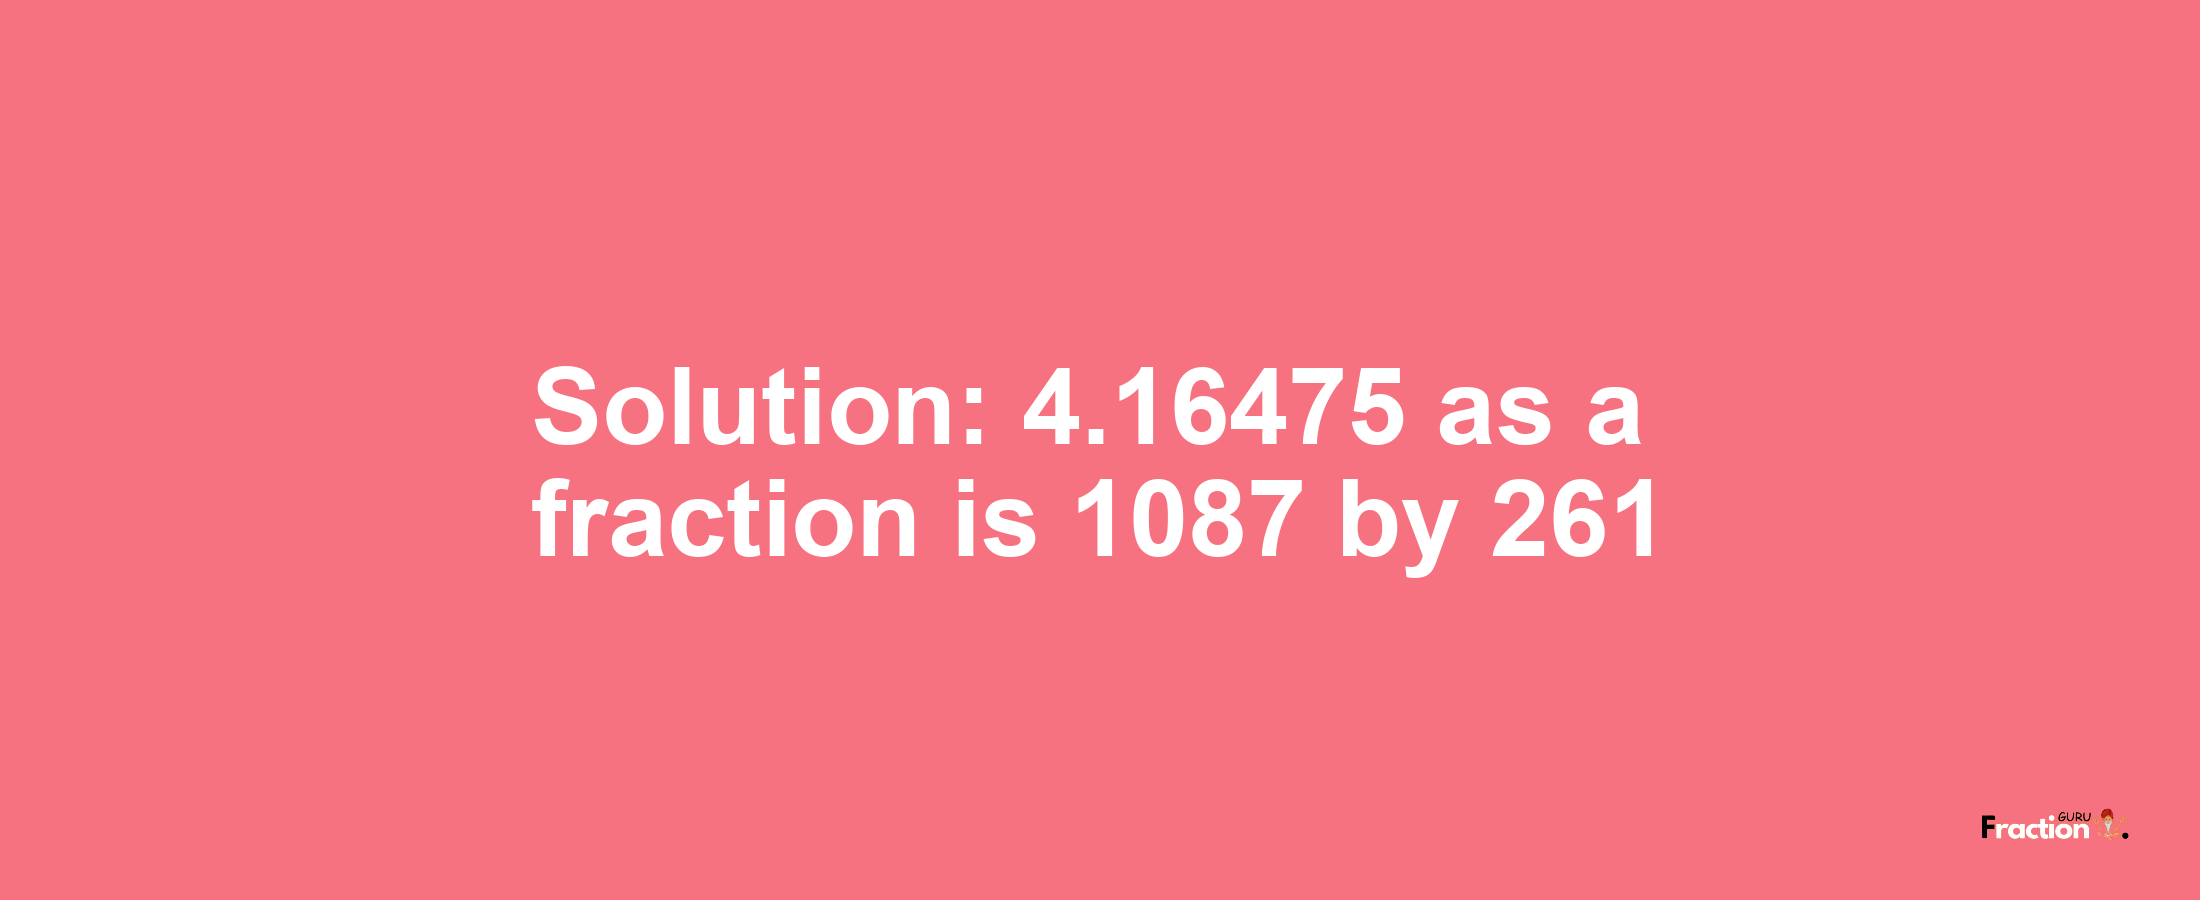 Solution:4.16475 as a fraction is 1087/261